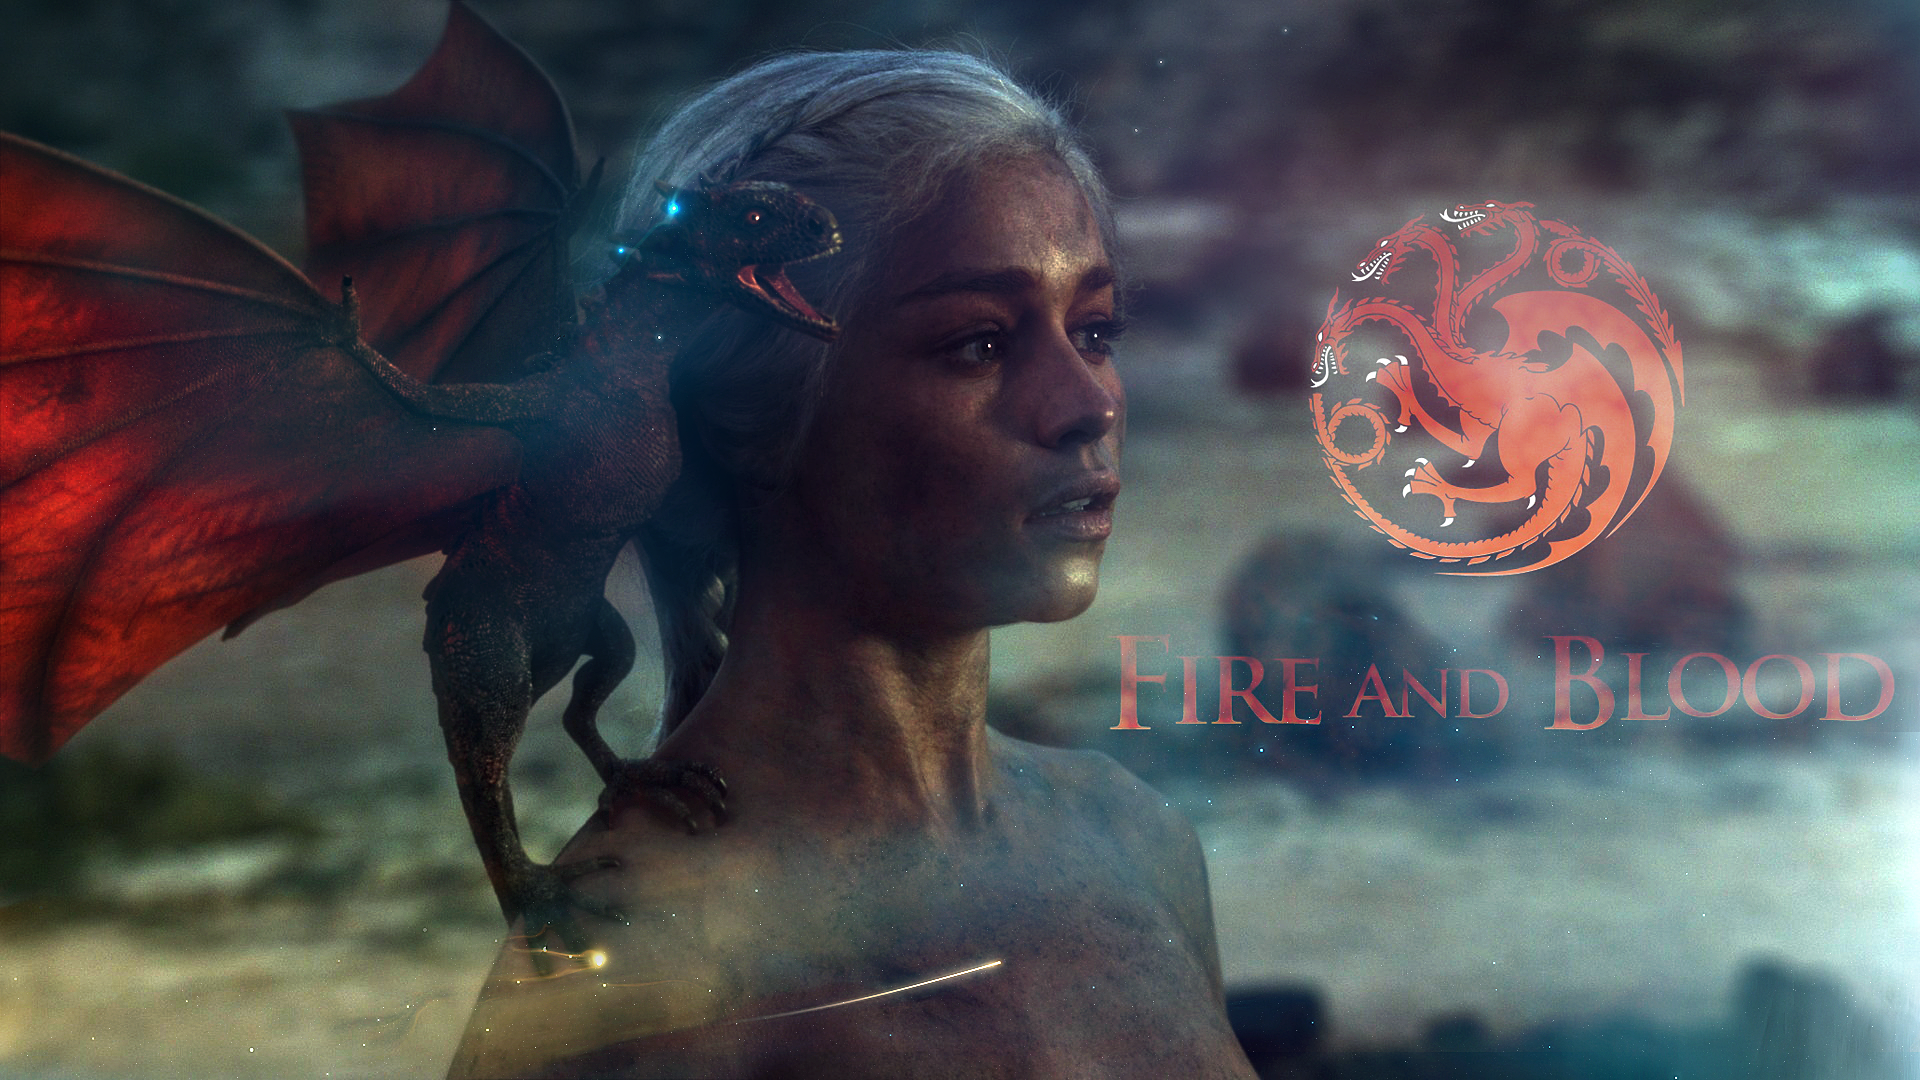 daenerys_targaryen___fire_and_blood_by_freedom4arts-d592fqp.png